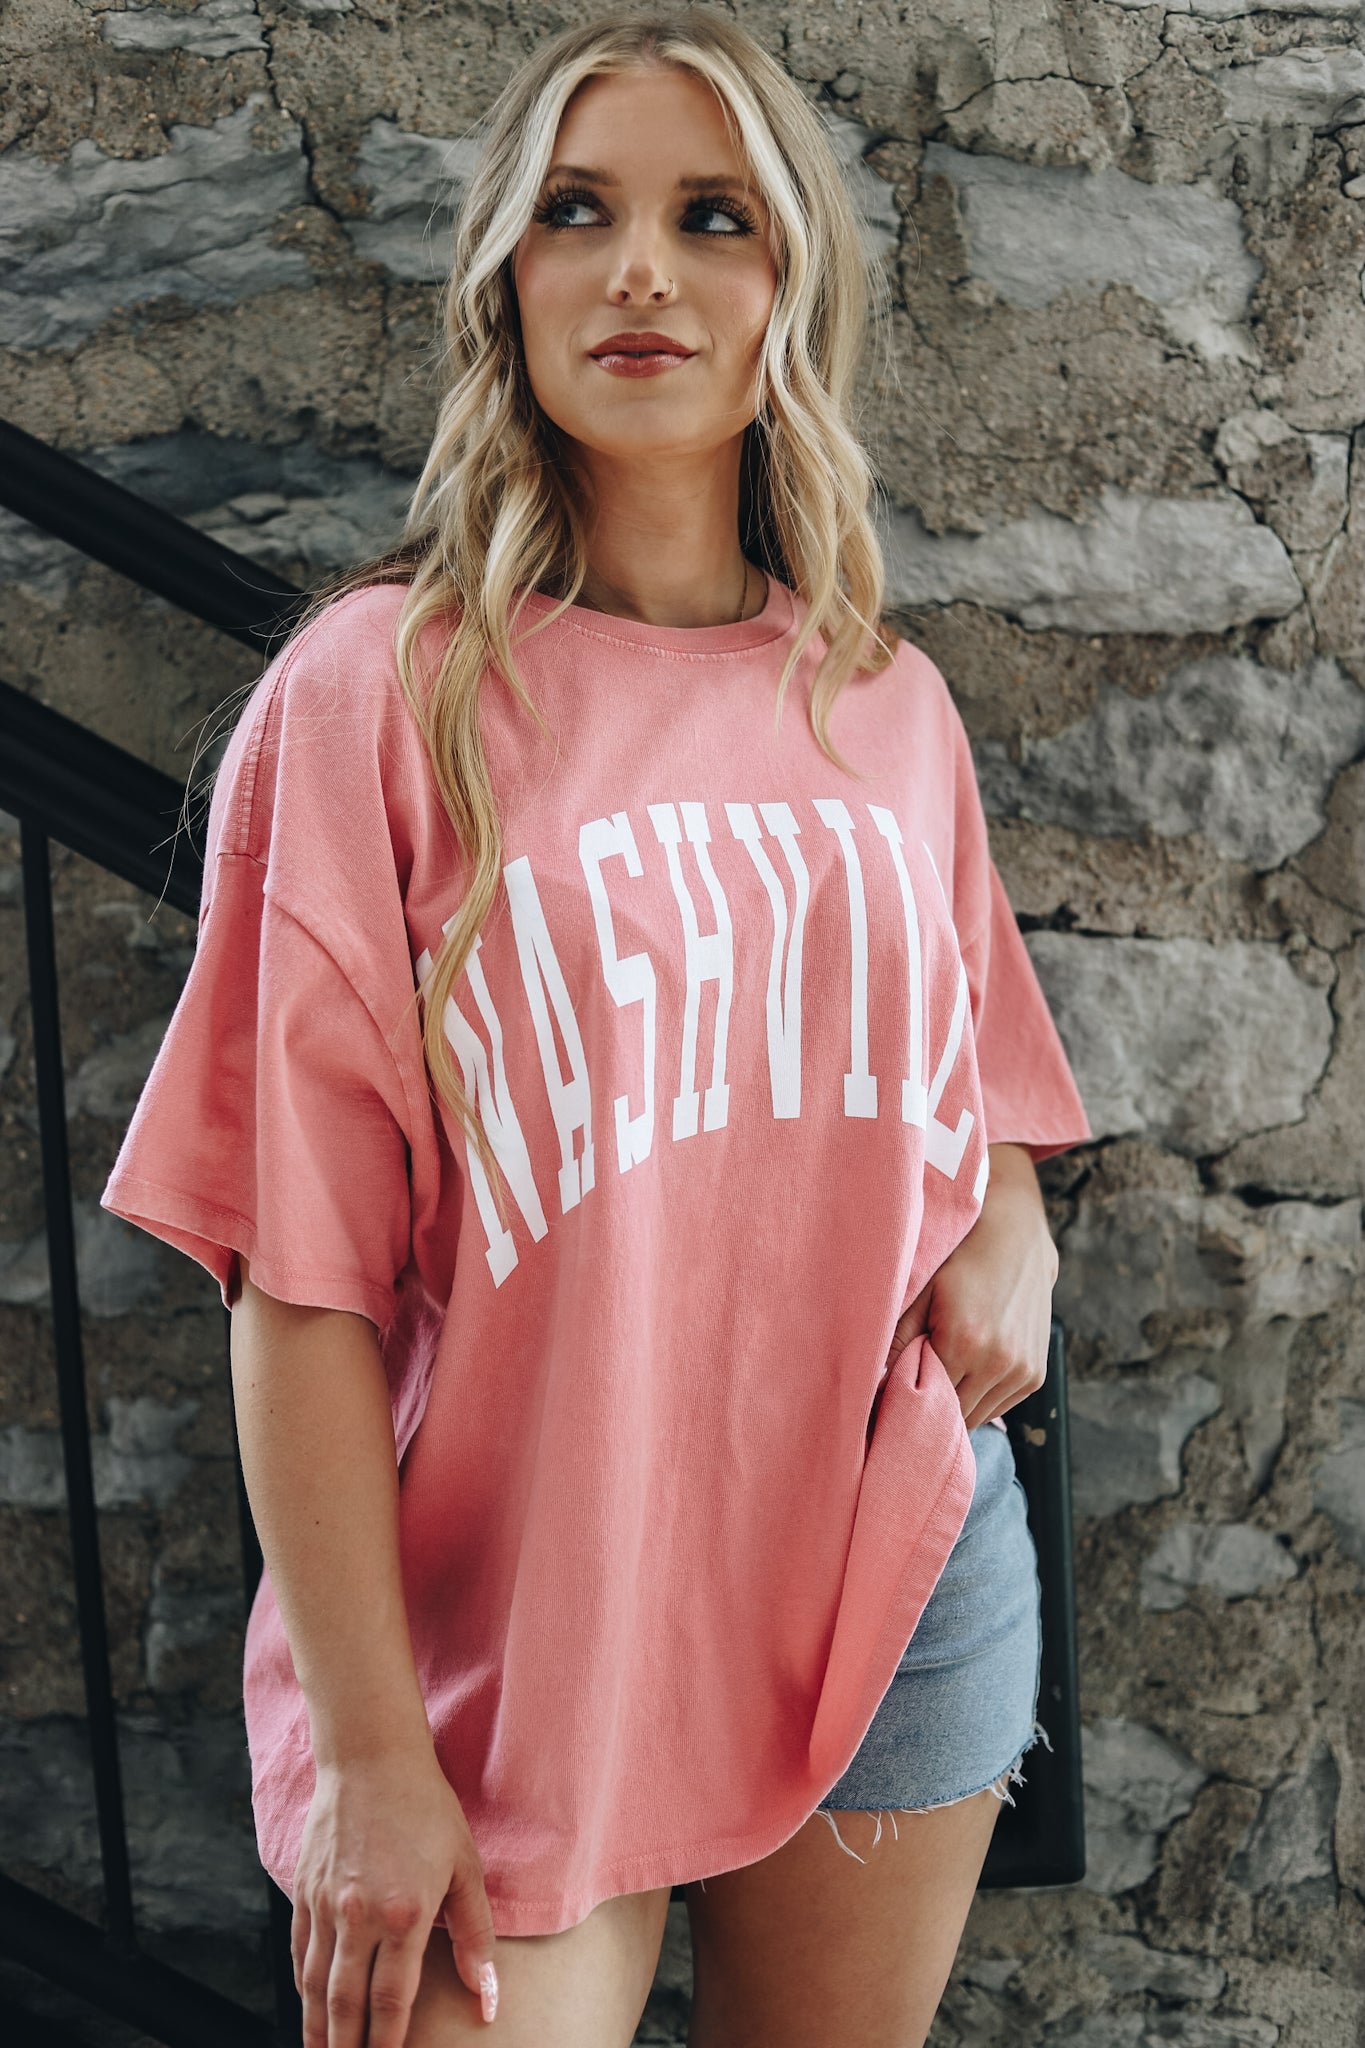 Shay wearing the kacey oversize tee in coral, with cut off shorts  